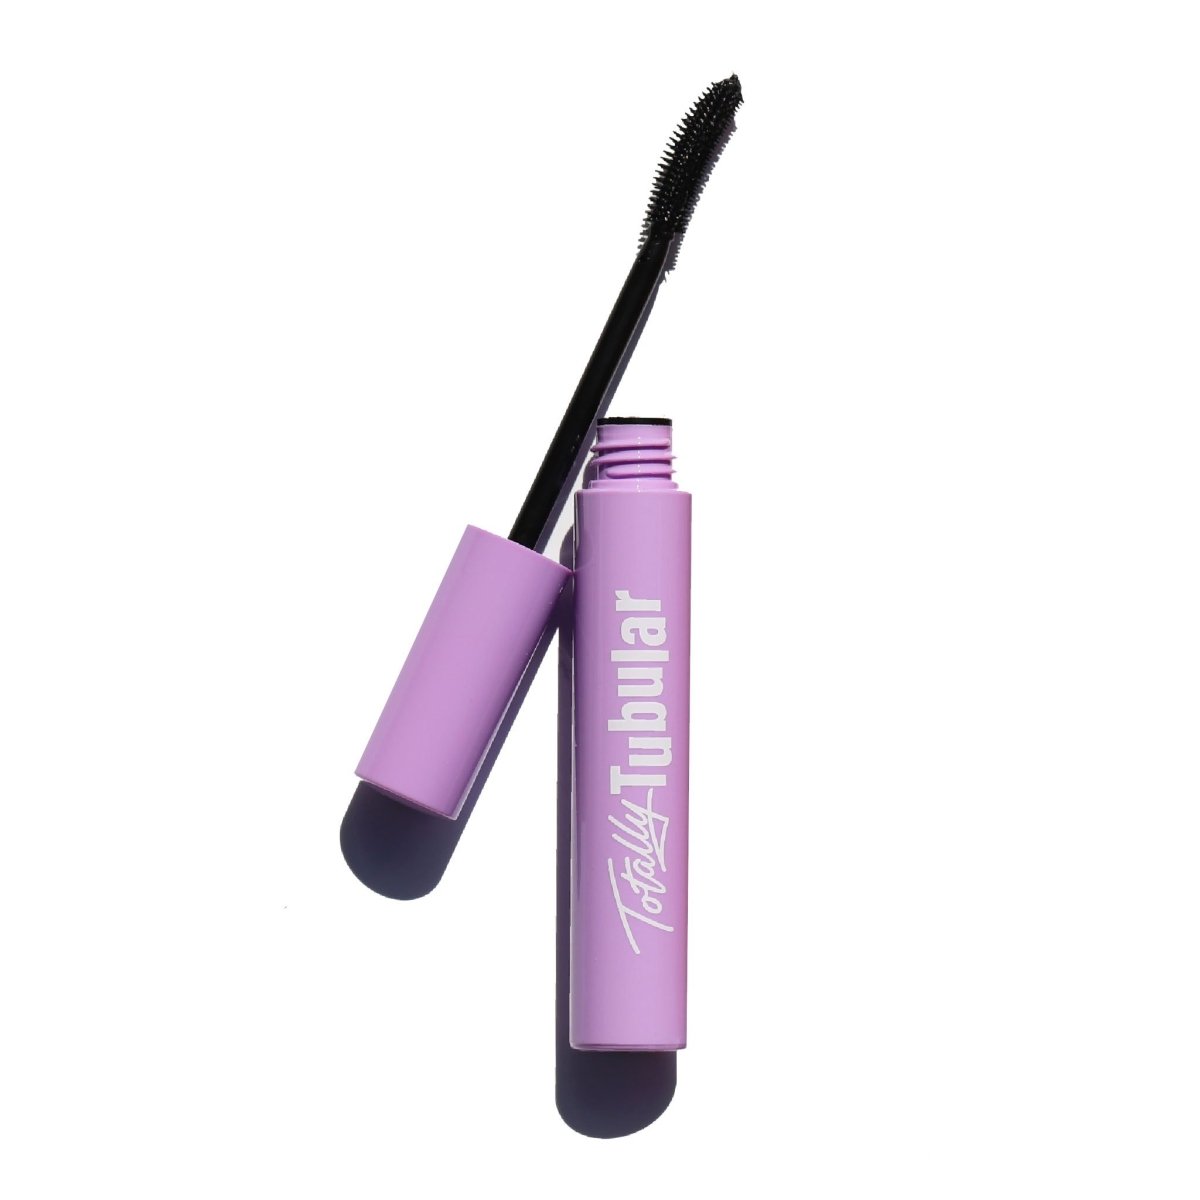 open purple mascara tube with black plastic curved applicator - totally tubular mascara, the ultimate - half caked makeup